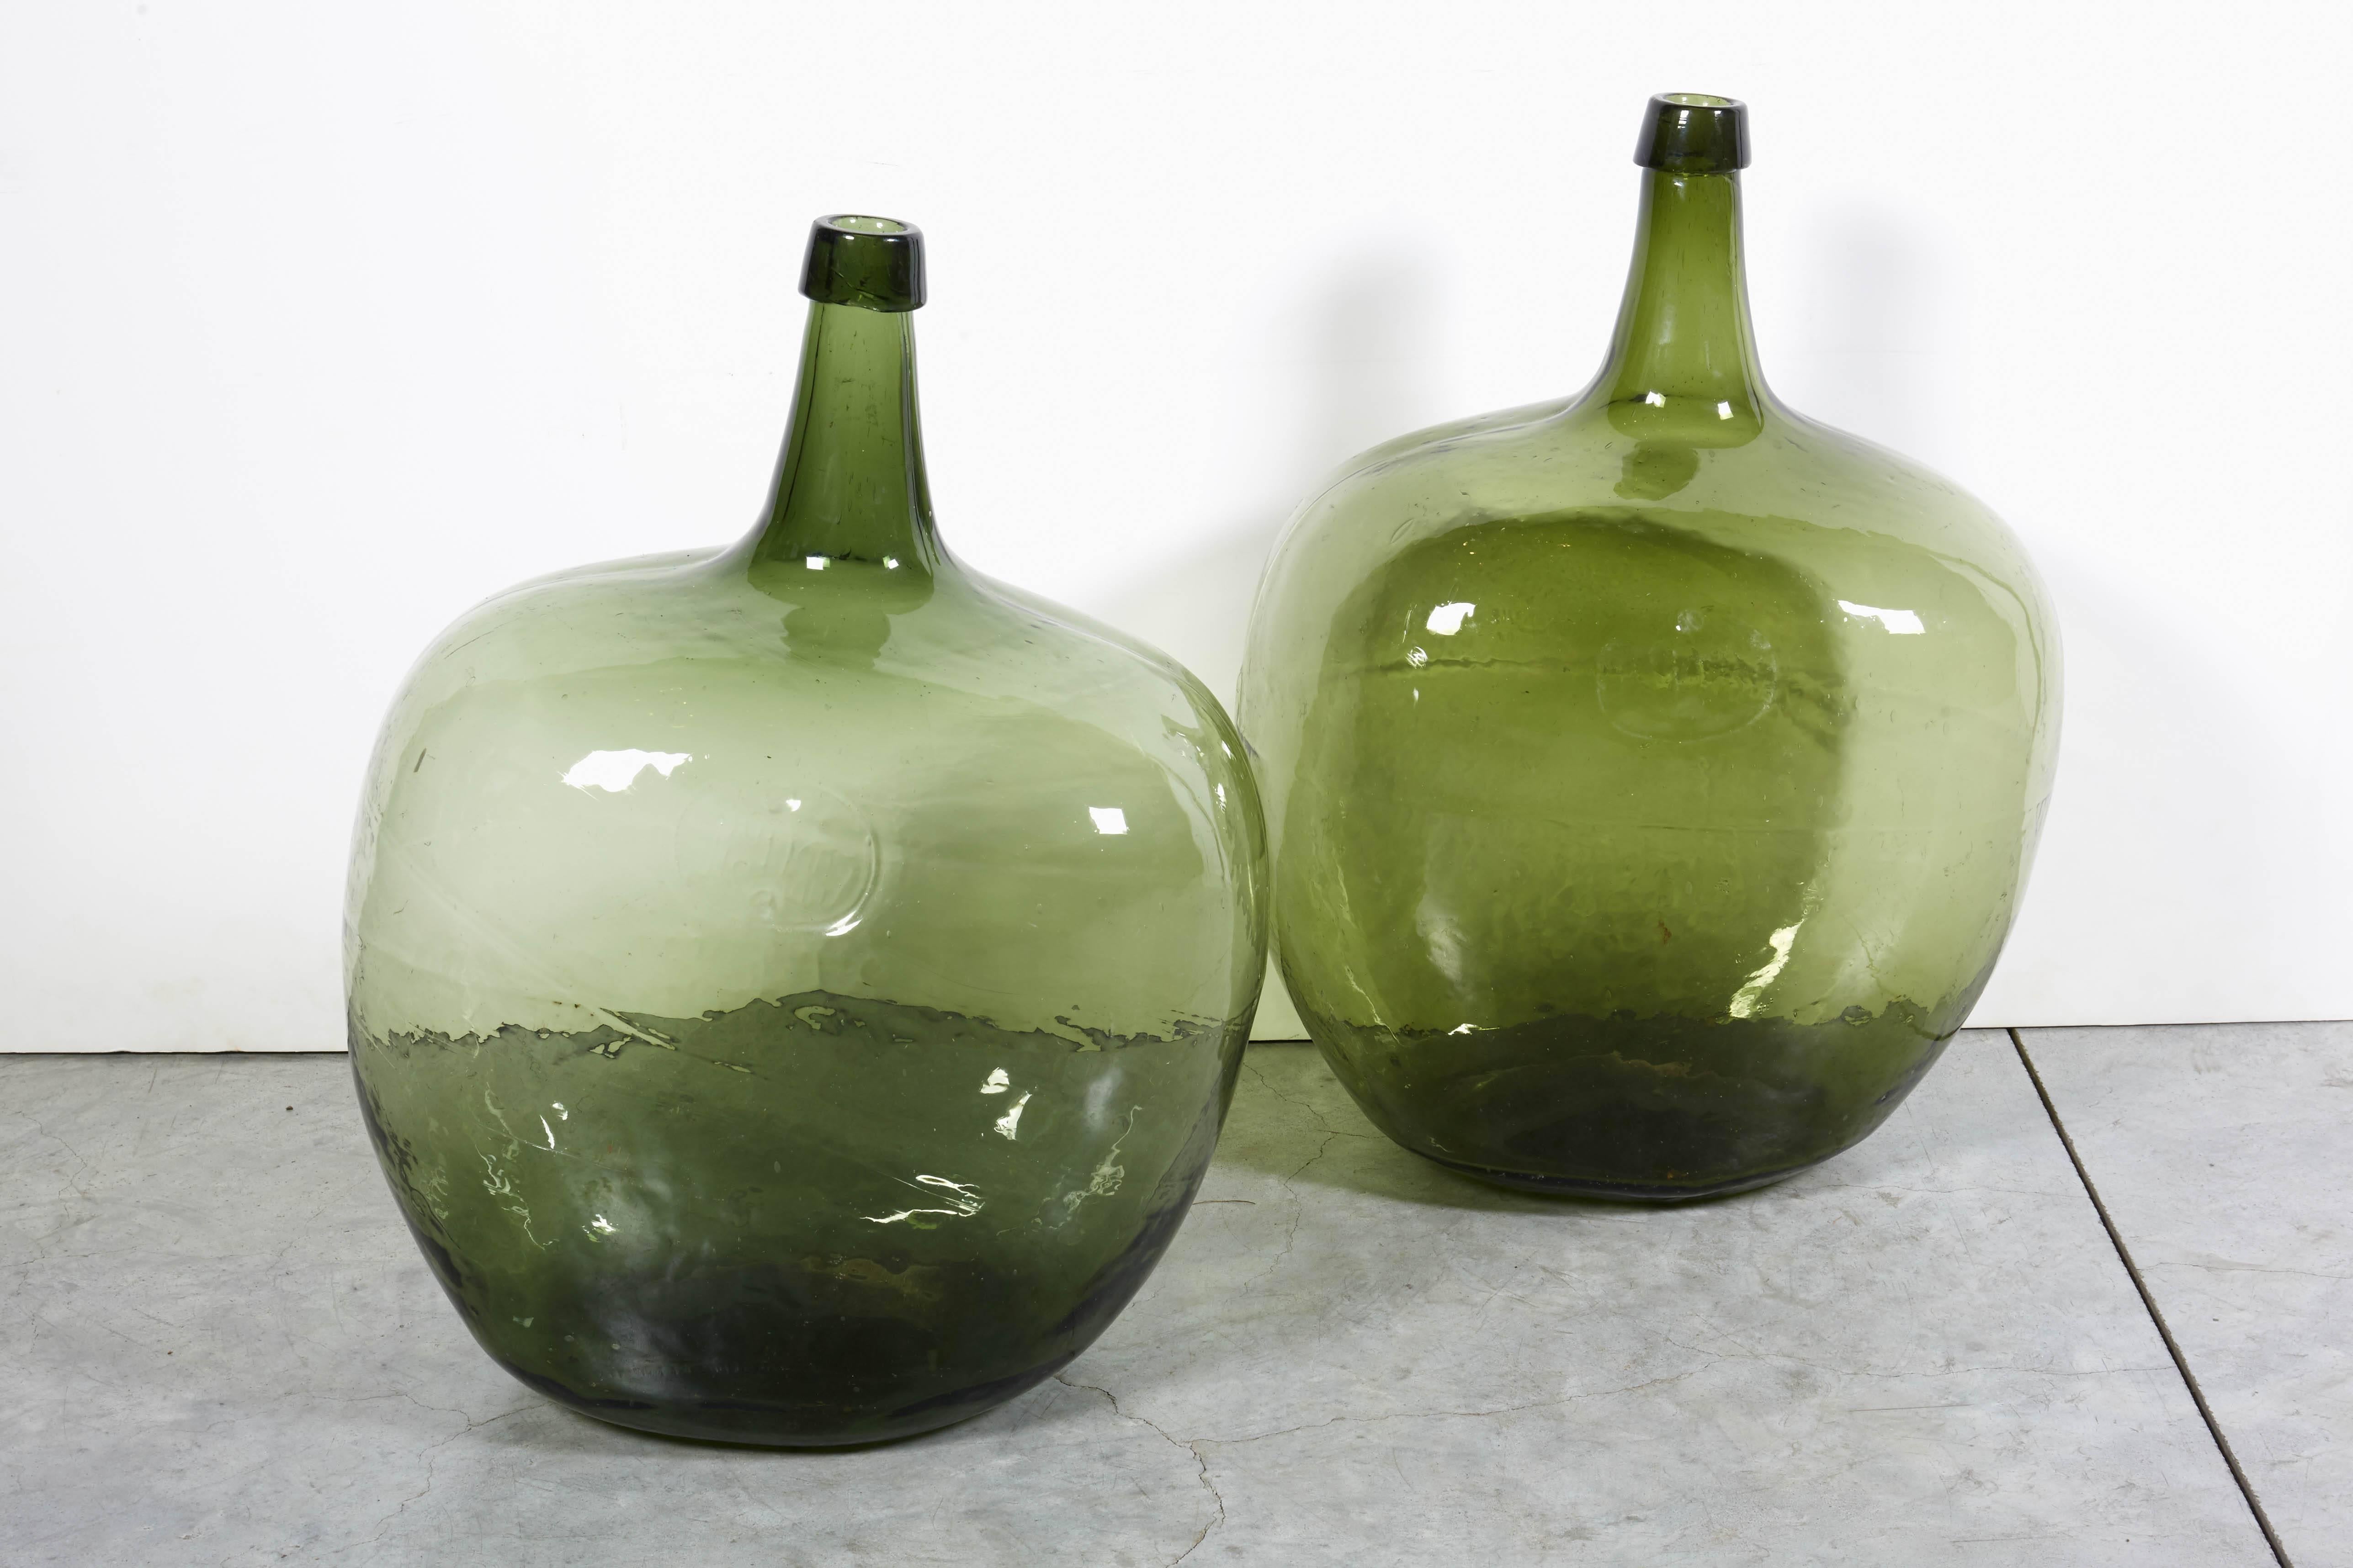 Two beautifully shaped blown glass 19th century demijohns with rough pontils and applied lips. Striking green color, France, circa 1880.
GL225.